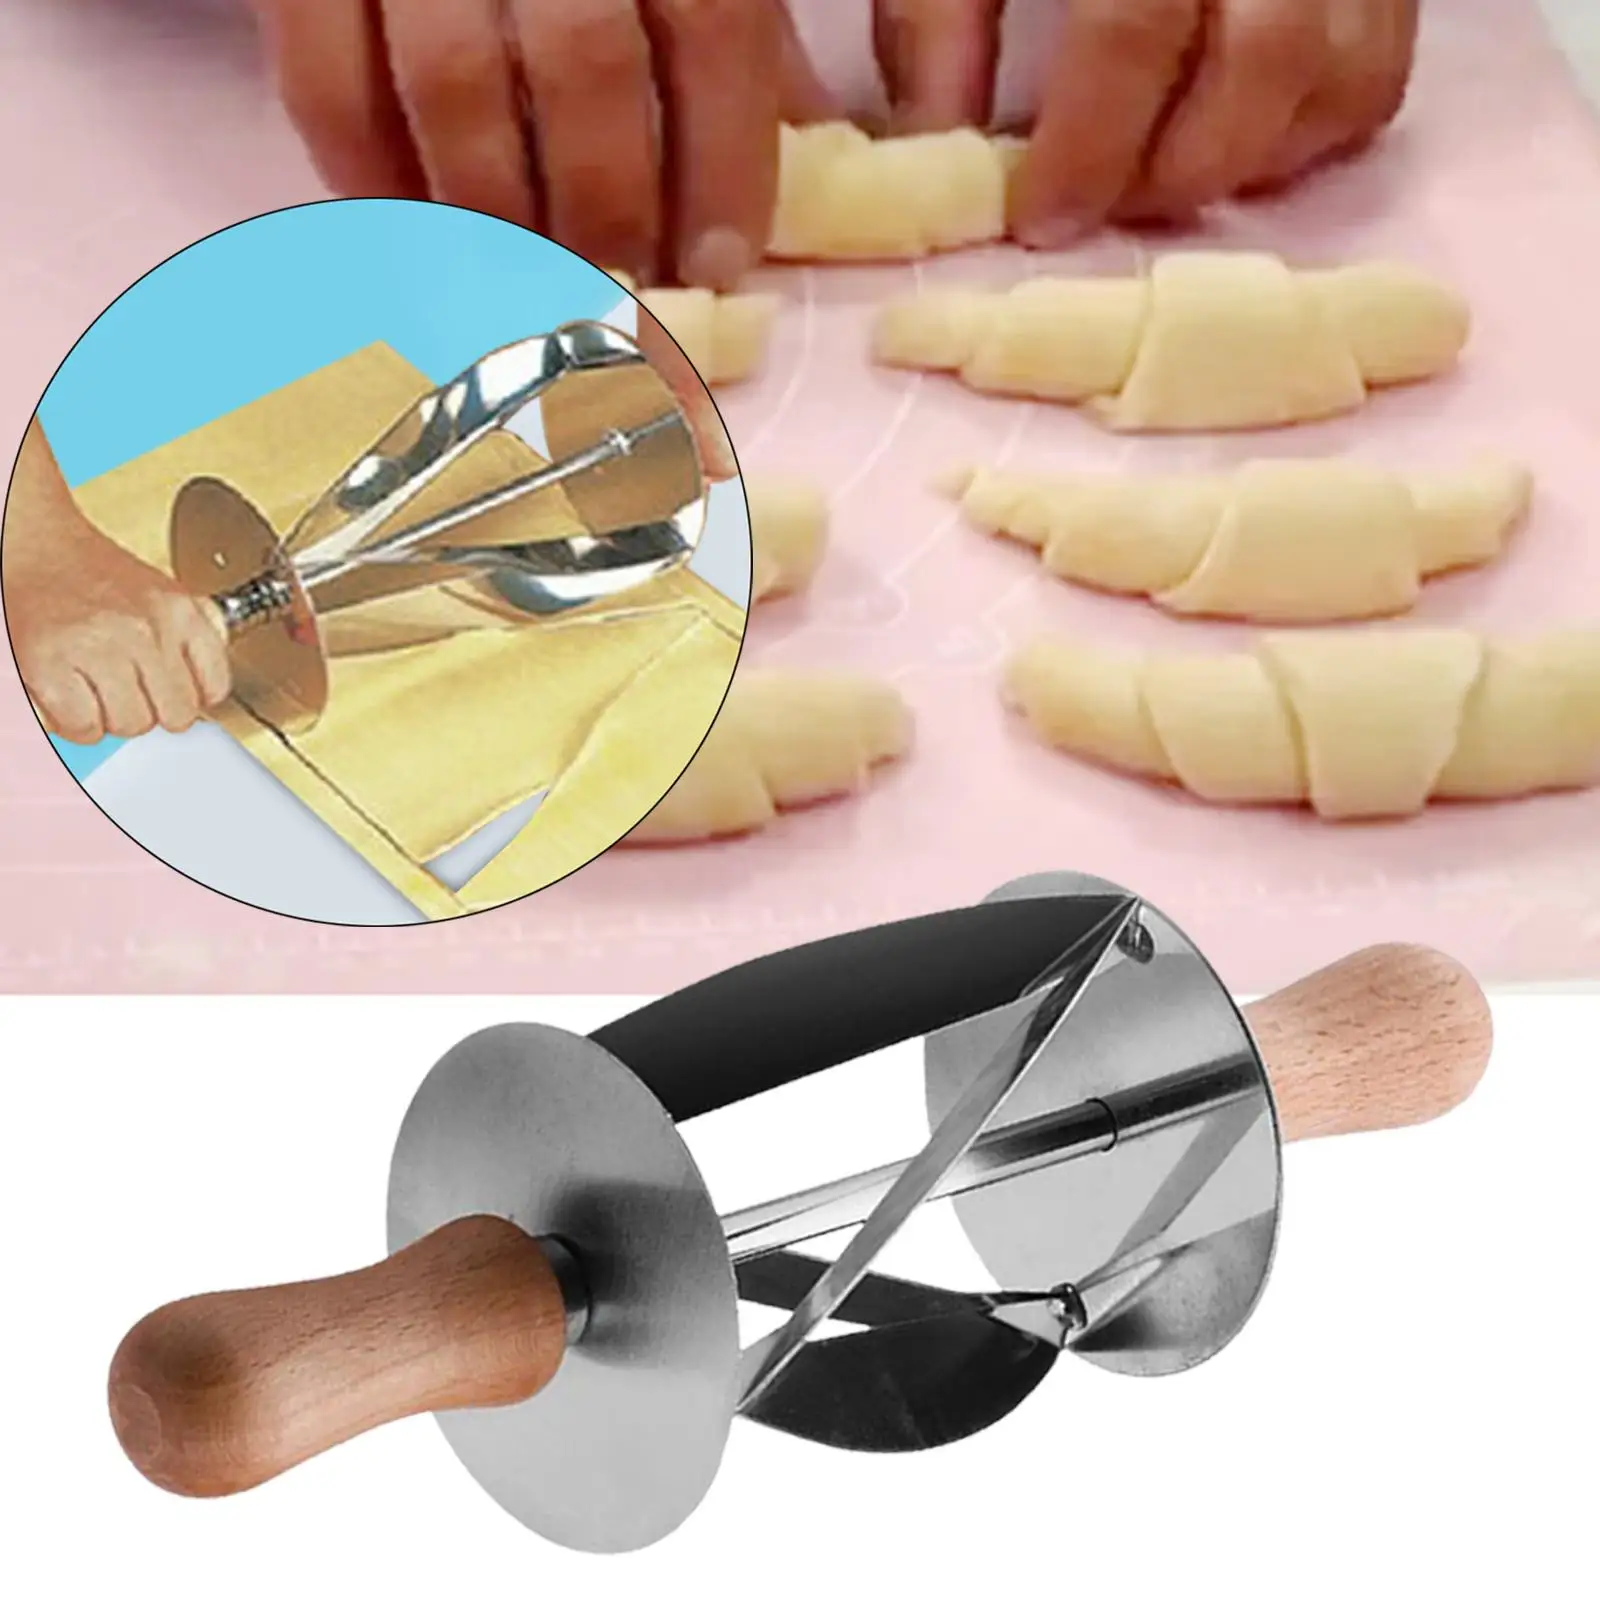 Stainless Steel Bread Roller Cutter with Wooden Handle Multifunction Rolling Pastry Cutter Kitchen Accessories